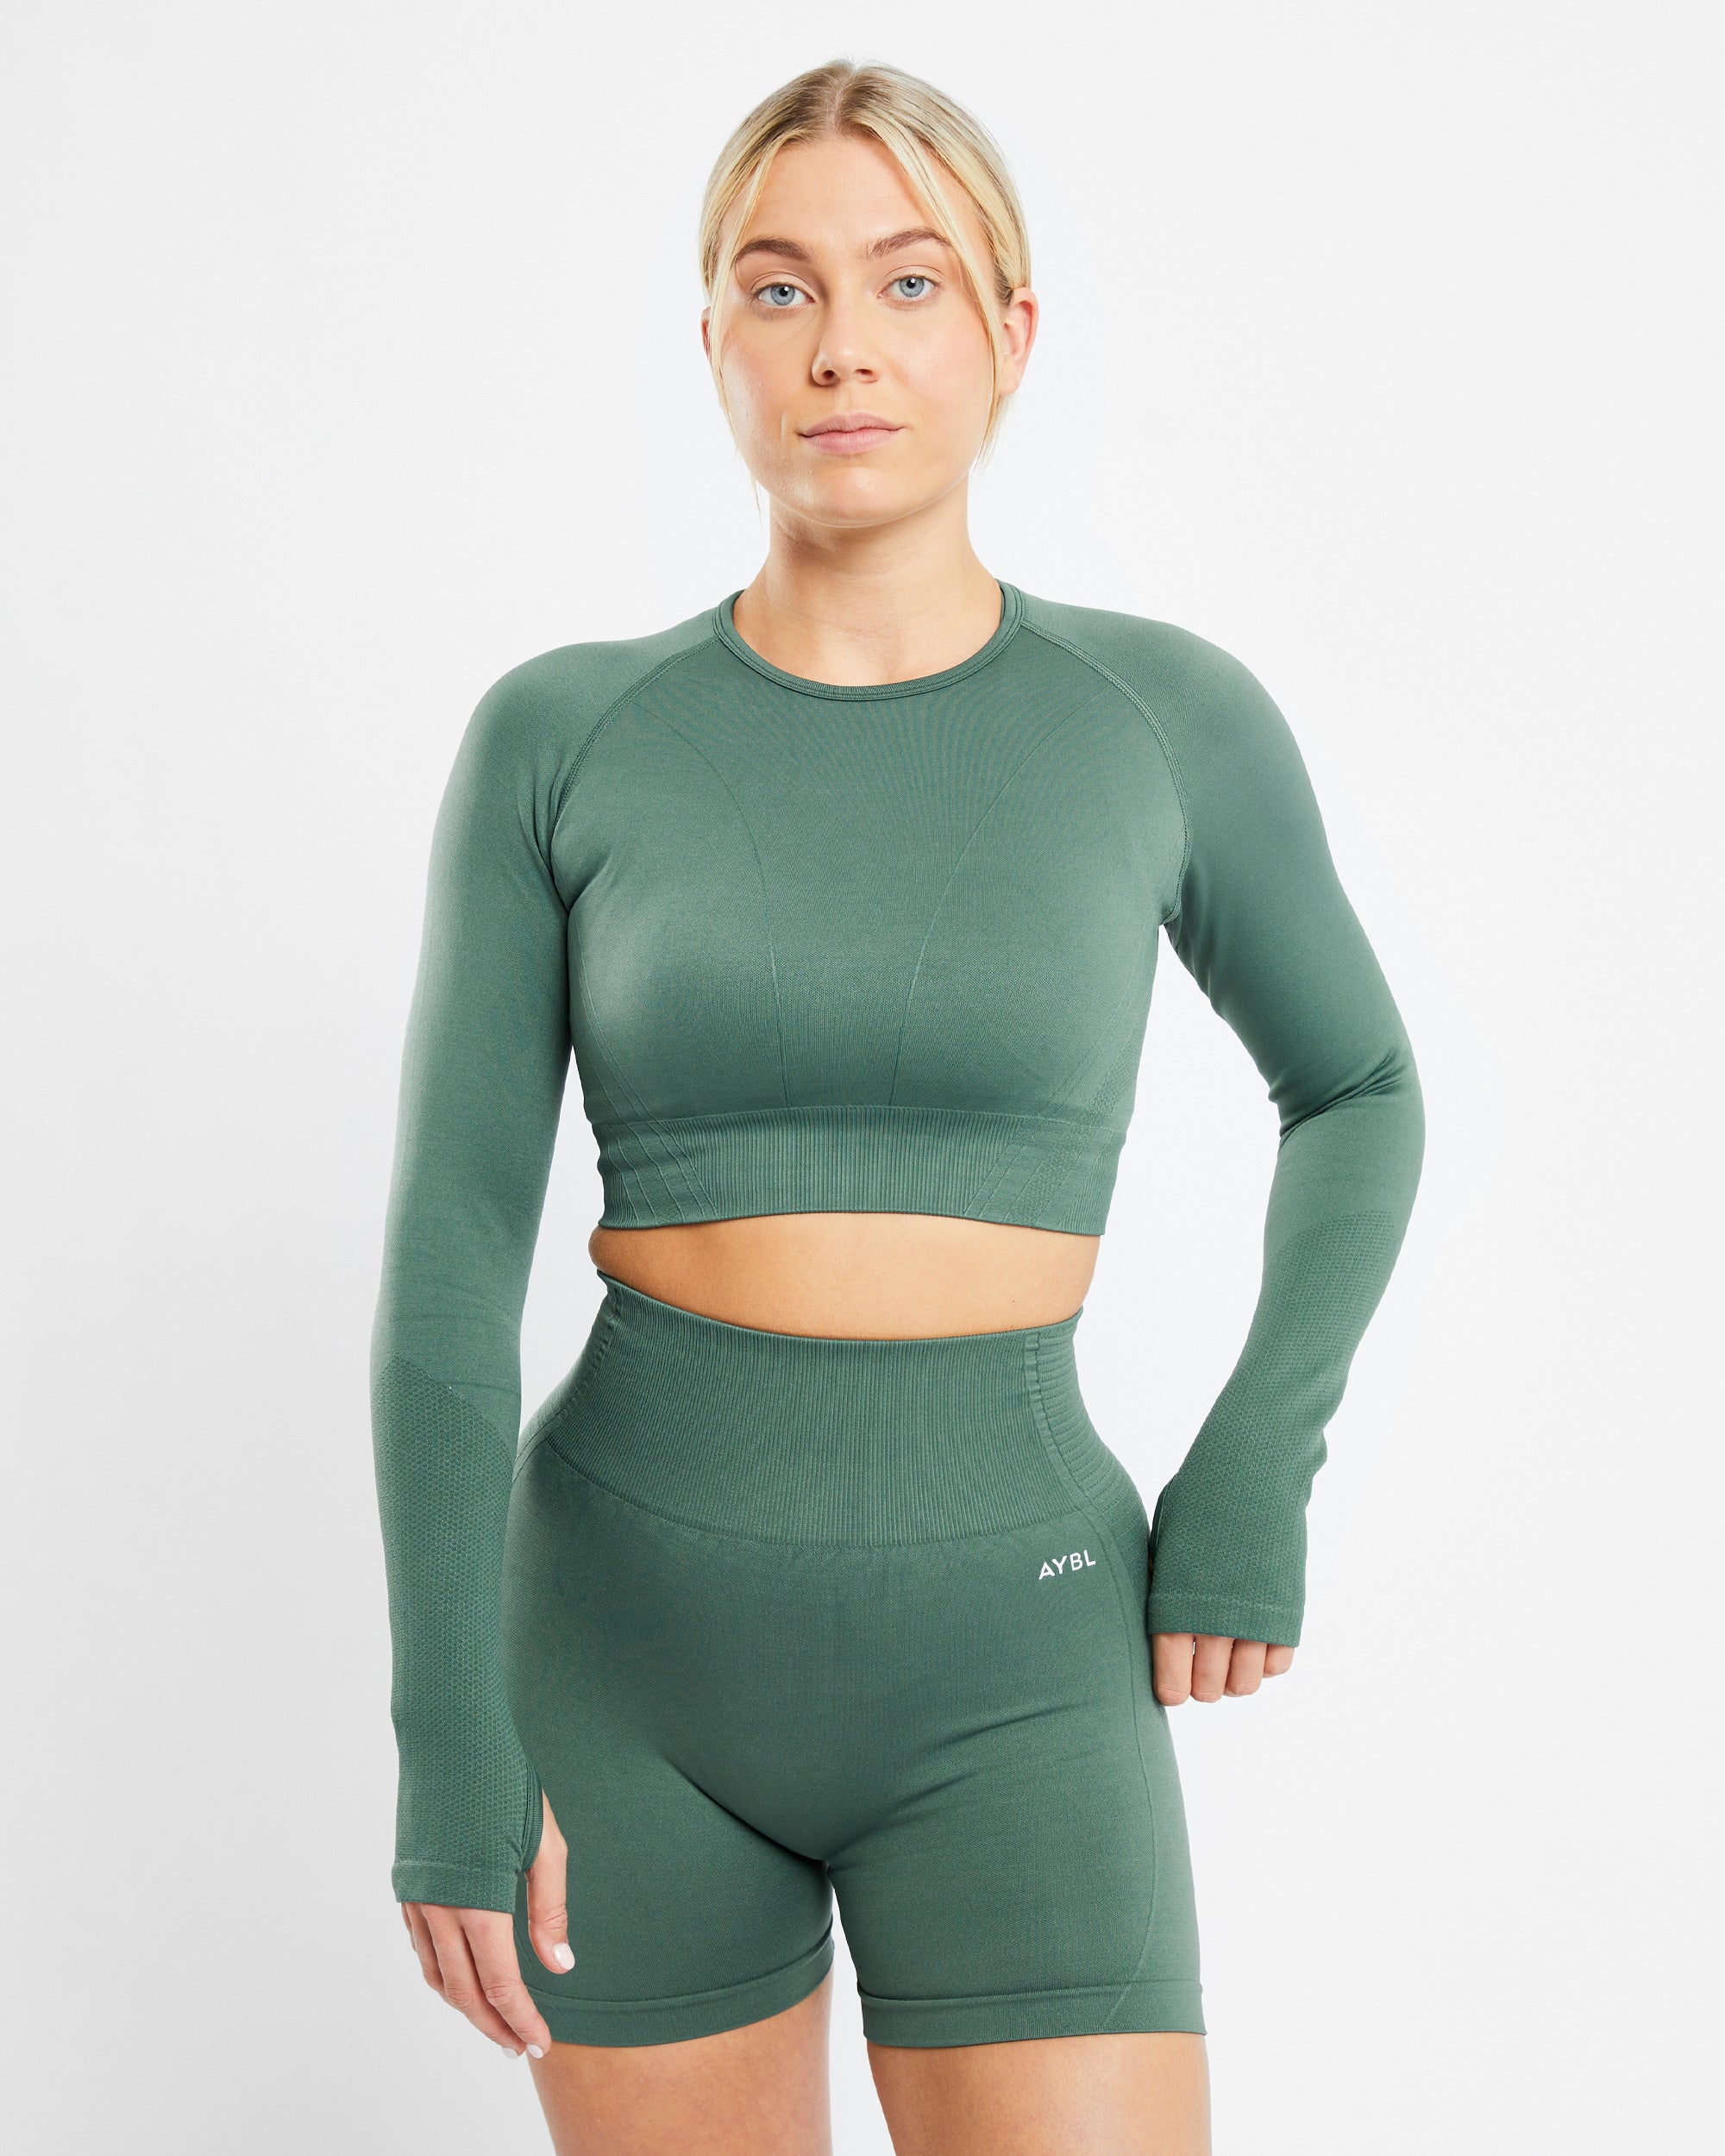 AYBL Core Leggings Green Size M - $20 (55% Off Retail) - From Tory